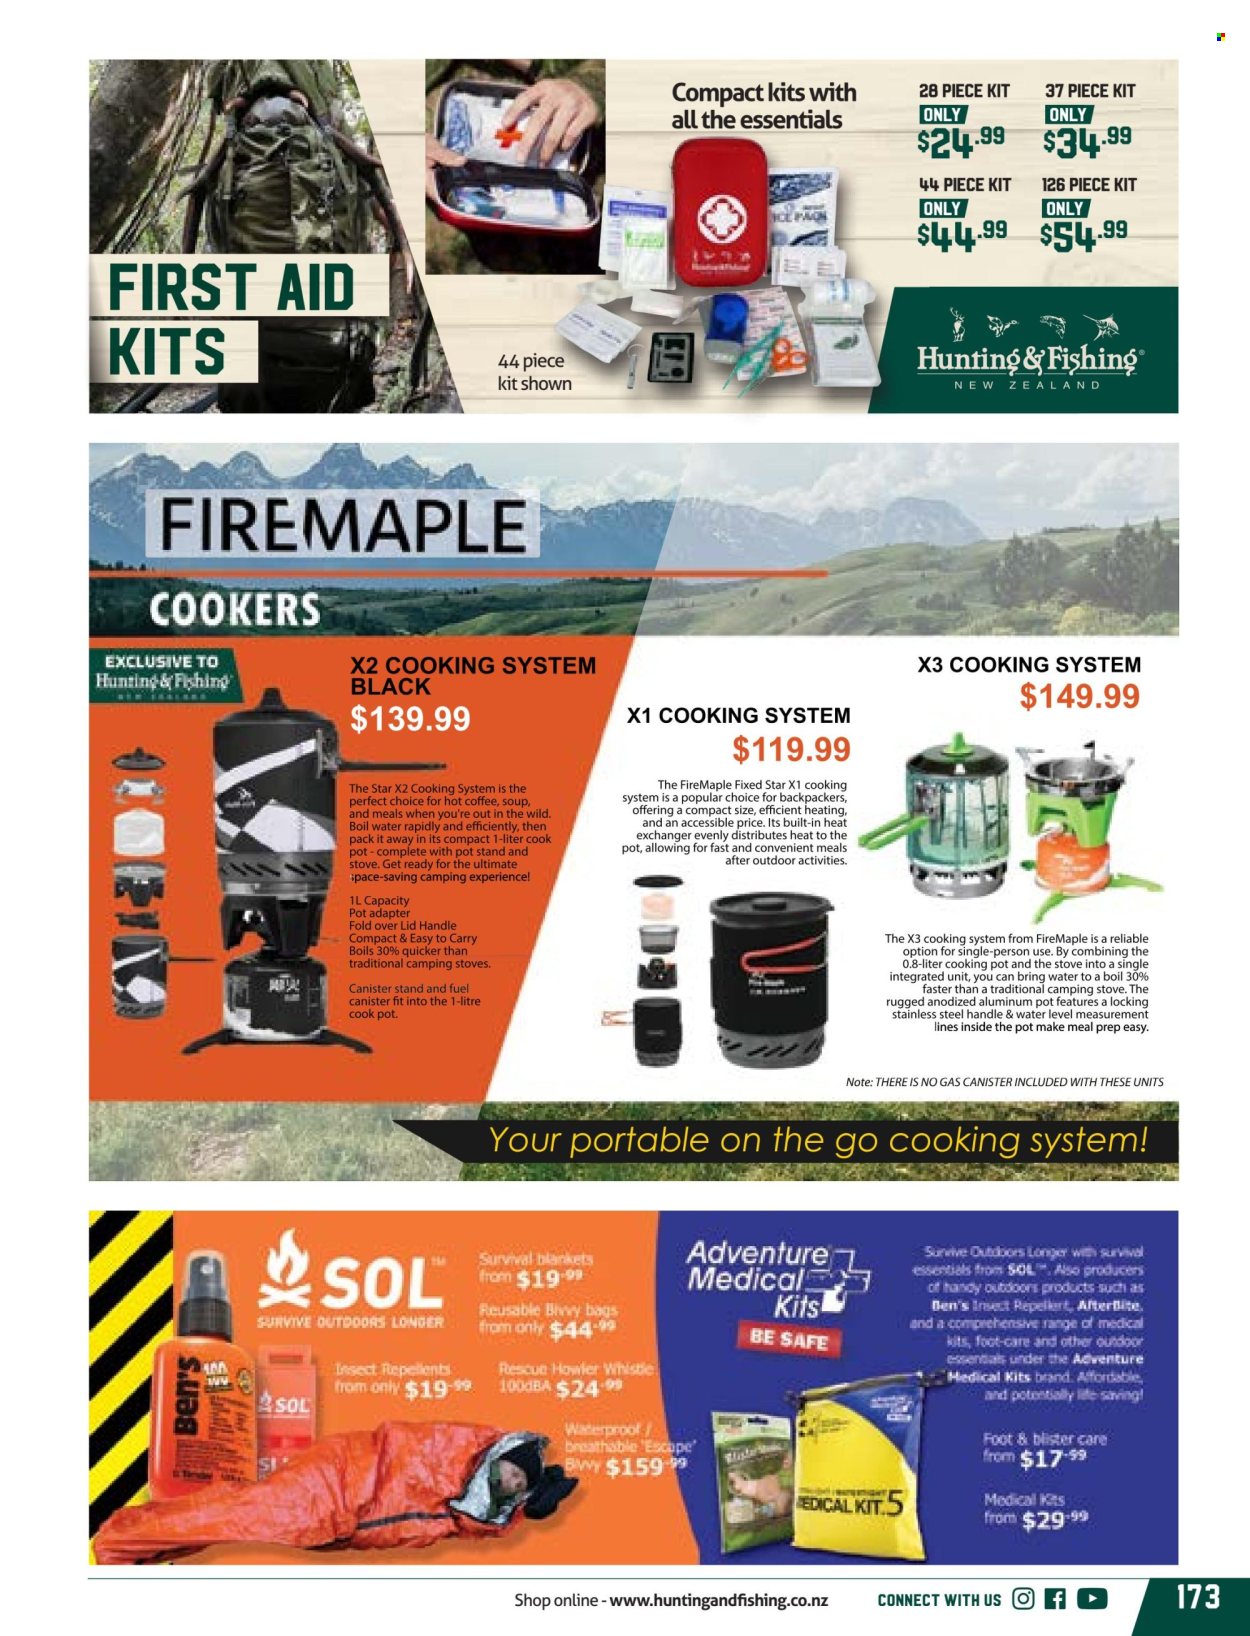 thumbnail - Hunting & Fishing mailer - Sales products - lid, pot, canister, stove, gas canister. Page 173.